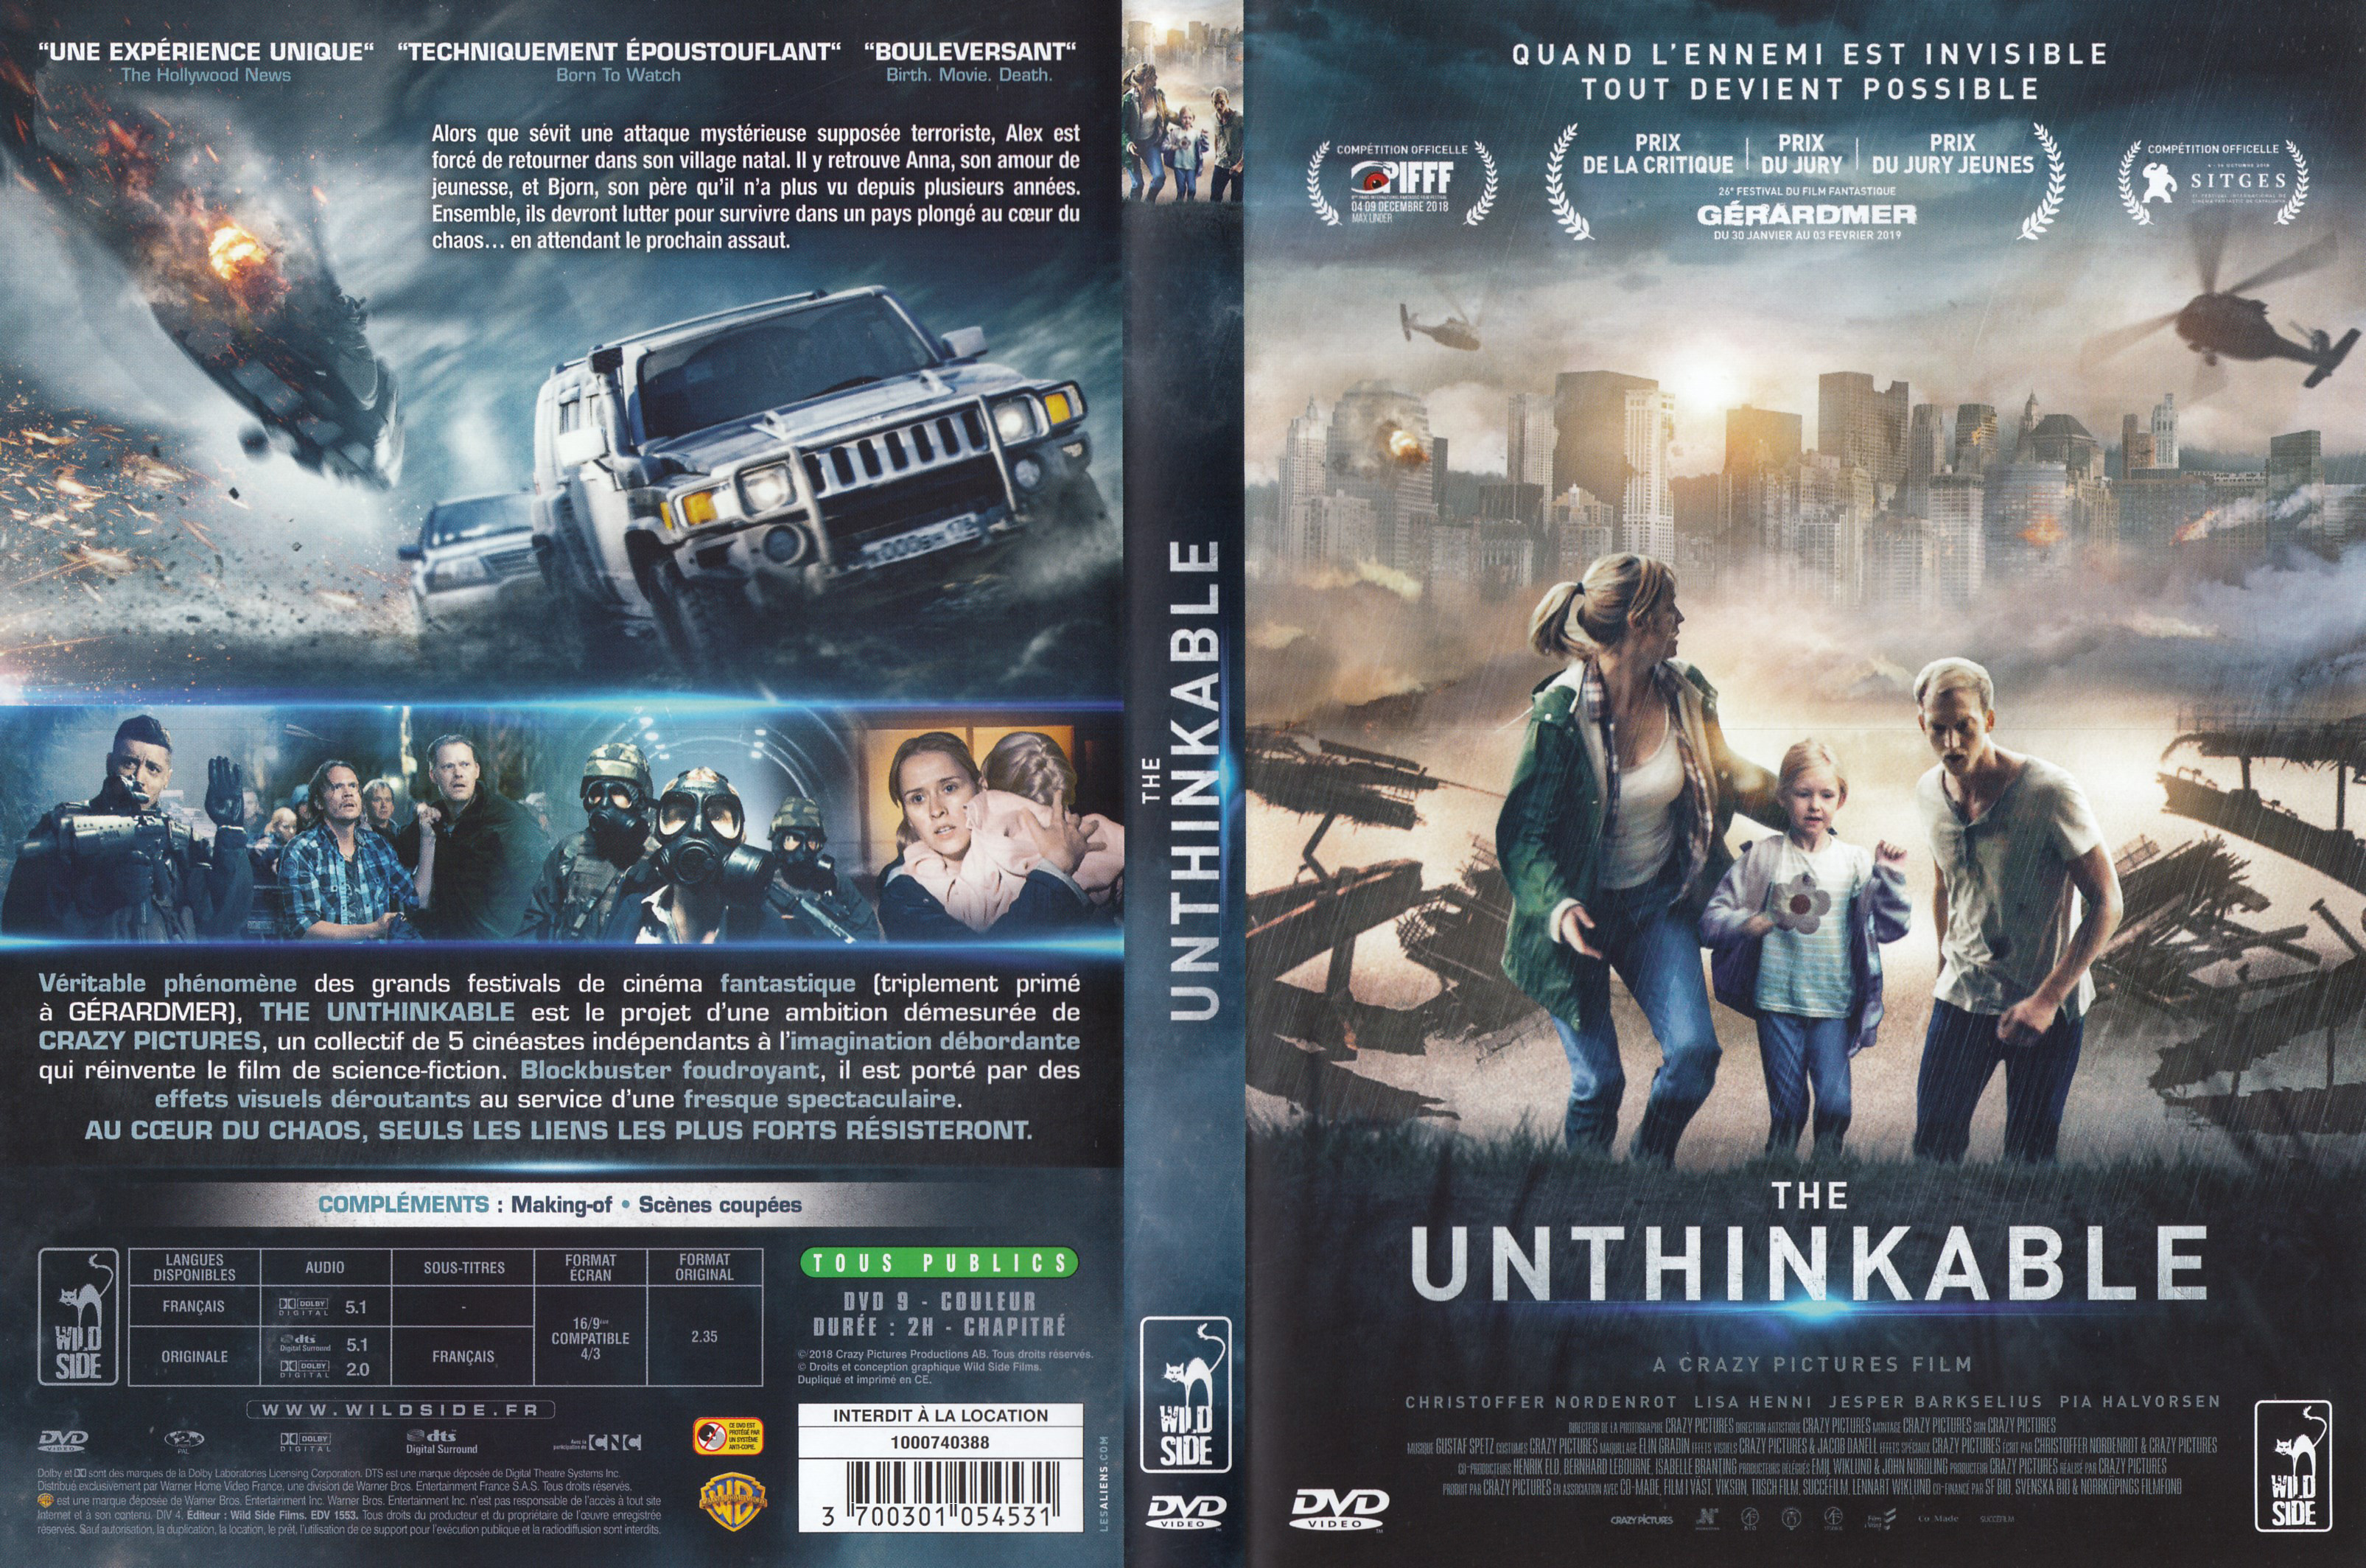 Jaquette DVD The unthinkable